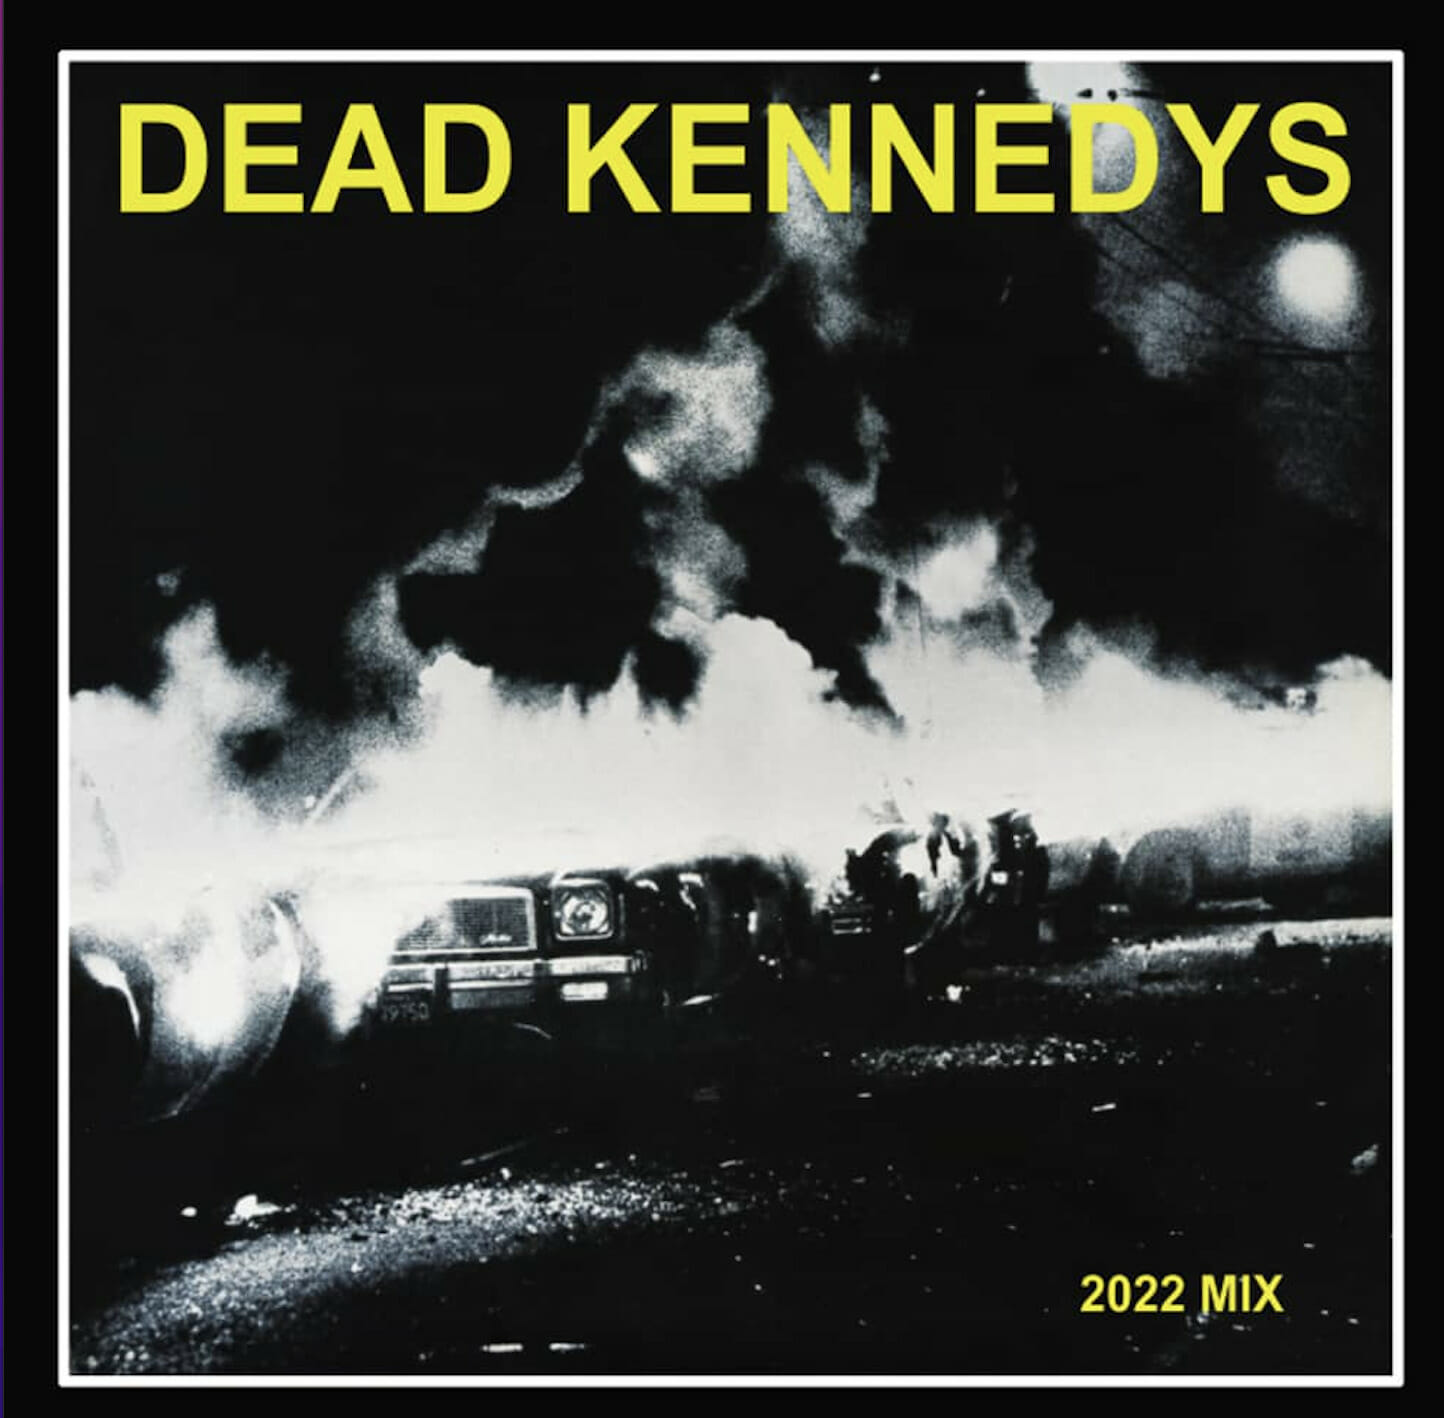 Dead Kennedys Announce ‘2022 Mix’ of ‘Fresh Fruit for Rotting Vegetables’